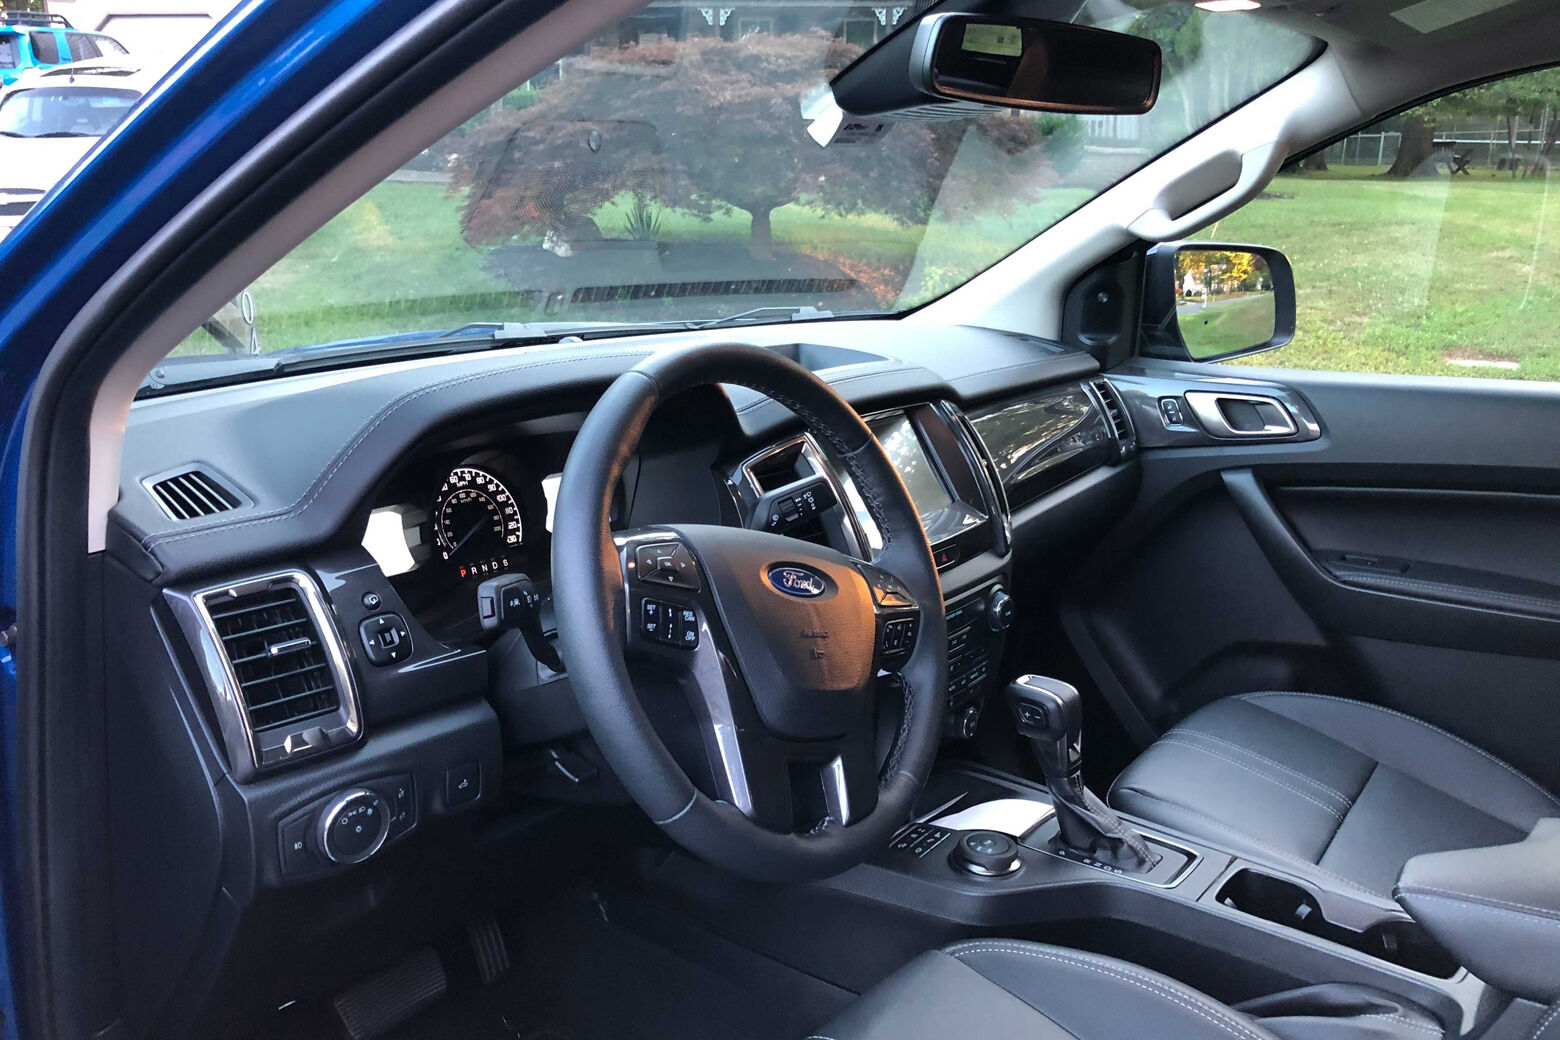 Interior of the Ford Ranger